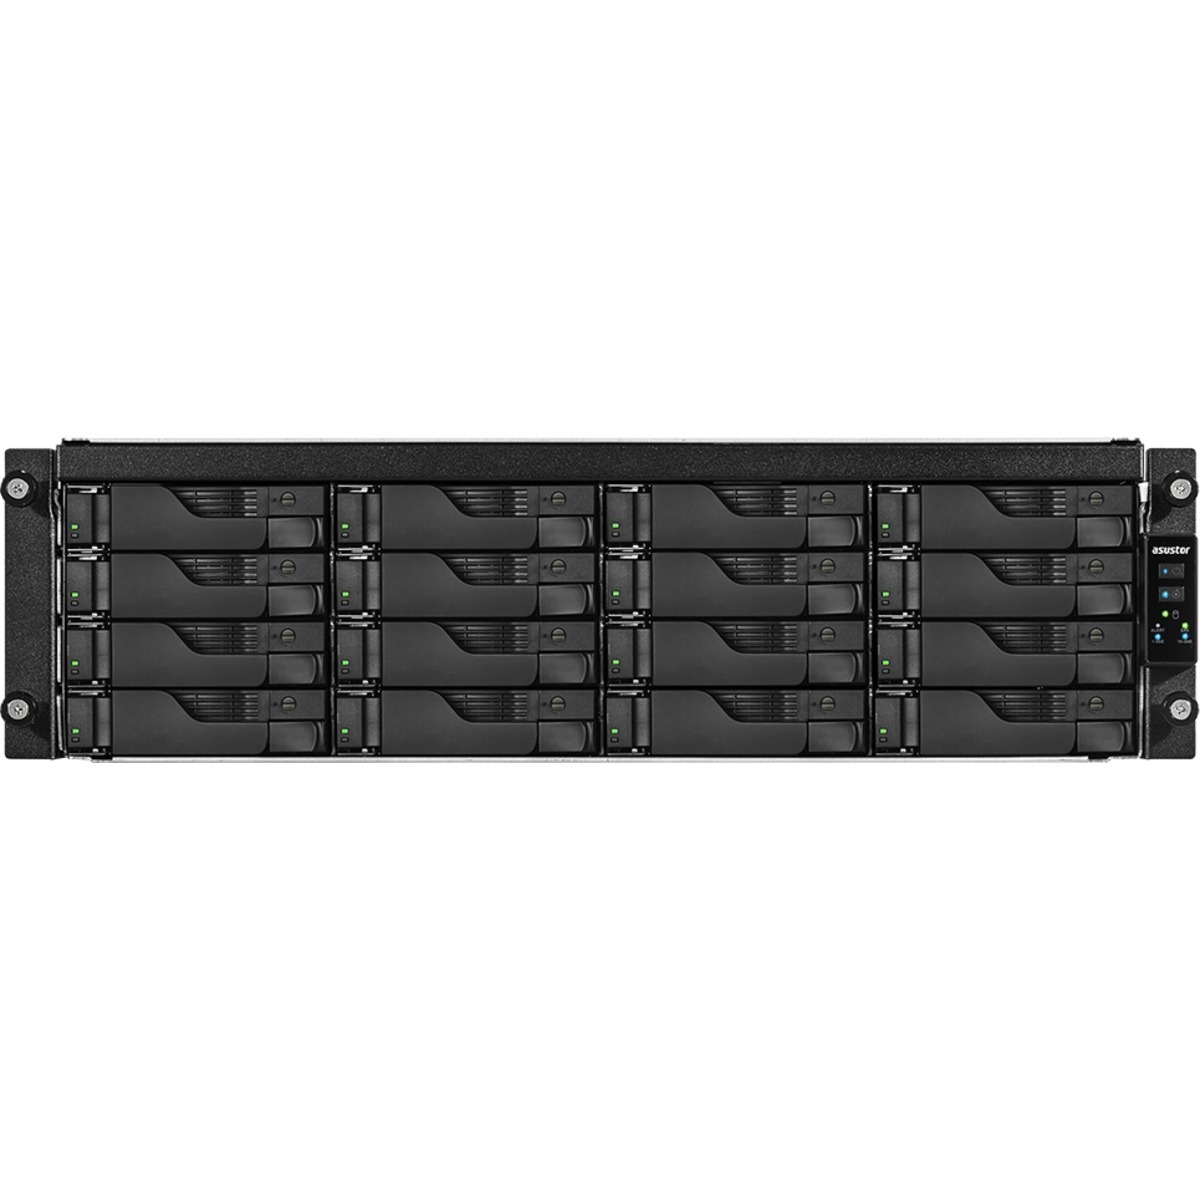 buy $7765 ASUSTOR AS7116RDX Lockerstor 16R Pro 16tb RackMount NAS - Network Attached Storage Device 16x1000gb Samsung 870 QVO MZ-77Q1T0 2.5 SATA 6Gb/s SSD CONSUMER Class Drives Installed - Burn-In Tested - nas headquarters buy network attached storage server device das new raid-5 free shipping usa AS7116RDX Lockerstor 16R Pro